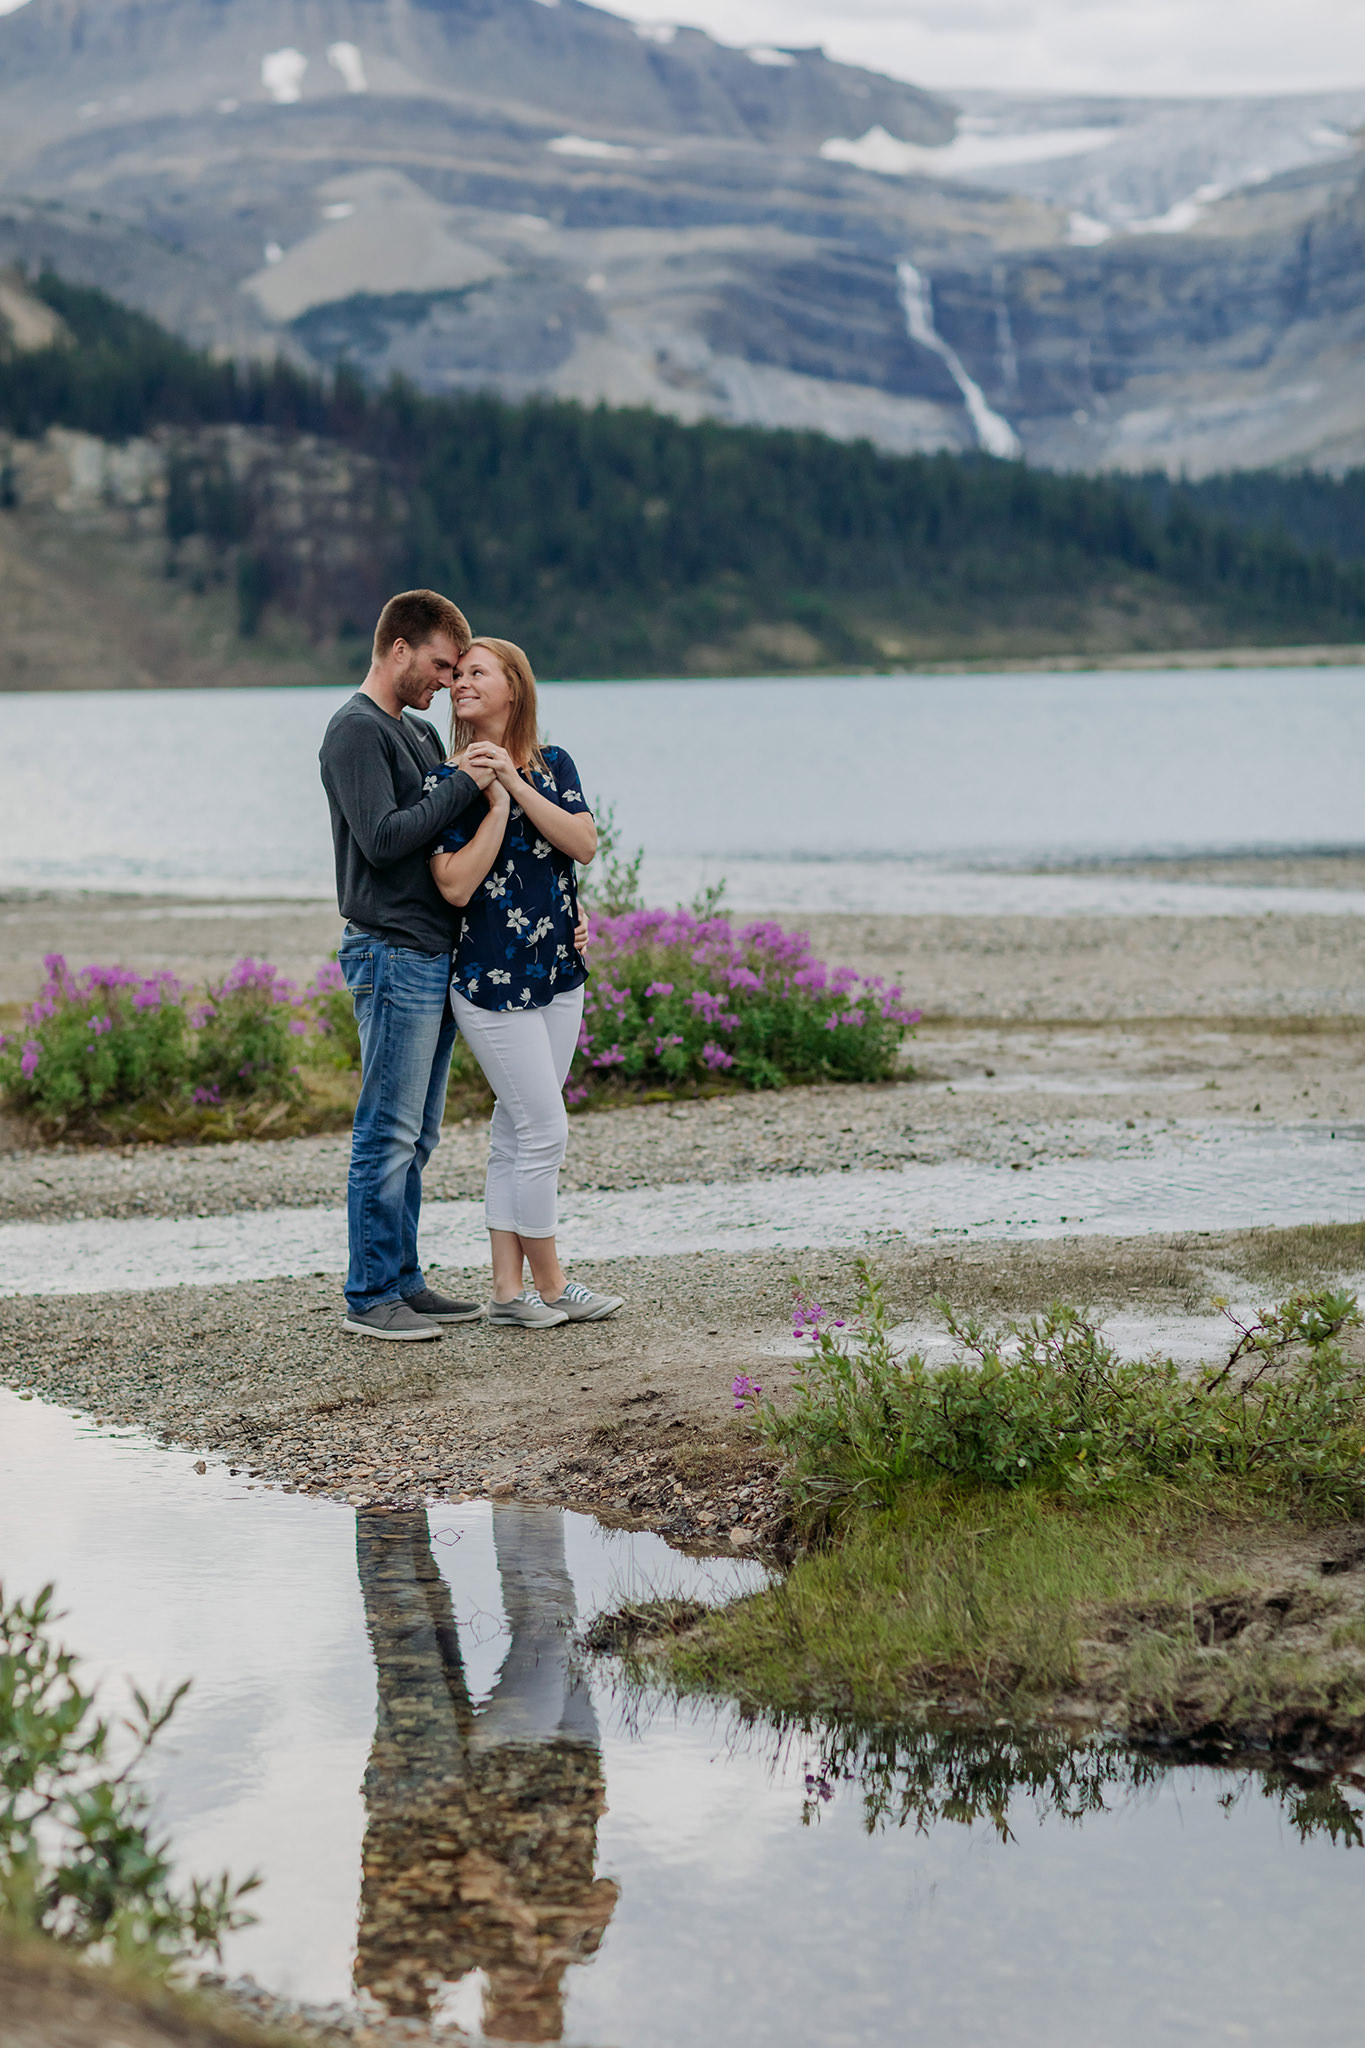 Summer couples photography session at Bow Lake on Icefields Parkway by ENV Photography